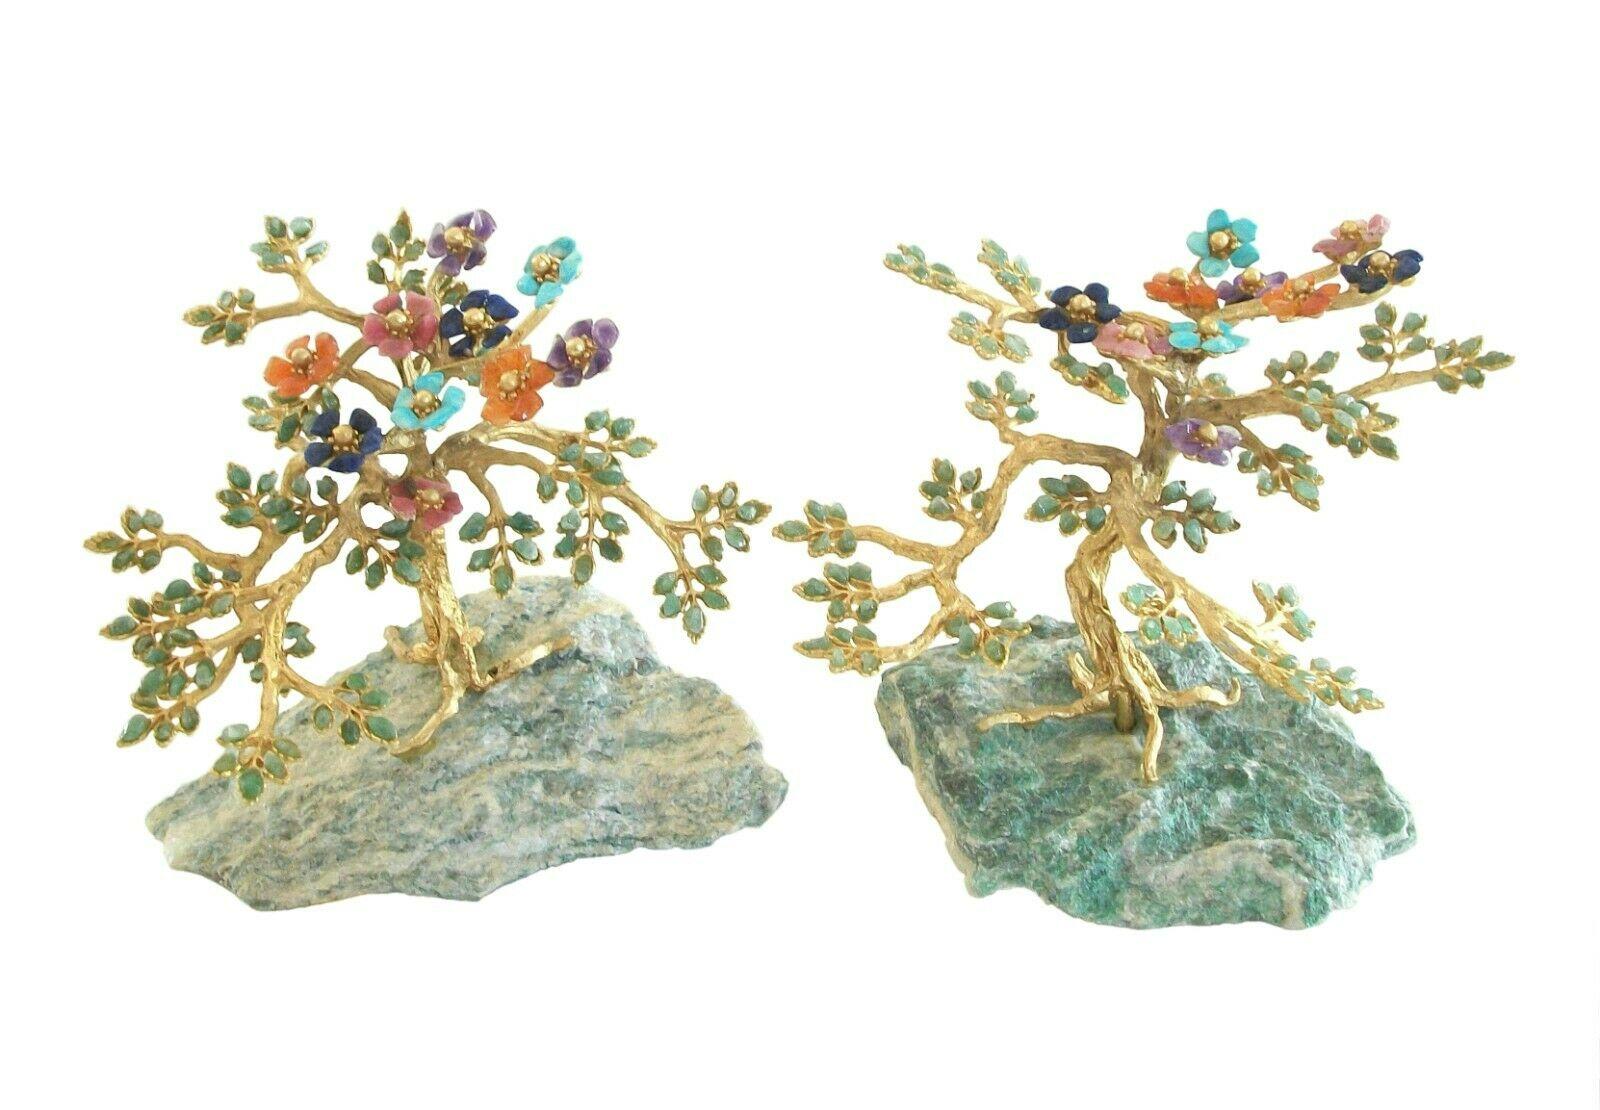 Edward Swoboda - Rare complementary pair of Hollywood Regency gem trees on natural green Jadeite bases - fine quality workmanship and details - each tree featuring Turquoise, Tanzanite, Amethyst, California pink Tourmaline and Citrine semi precious